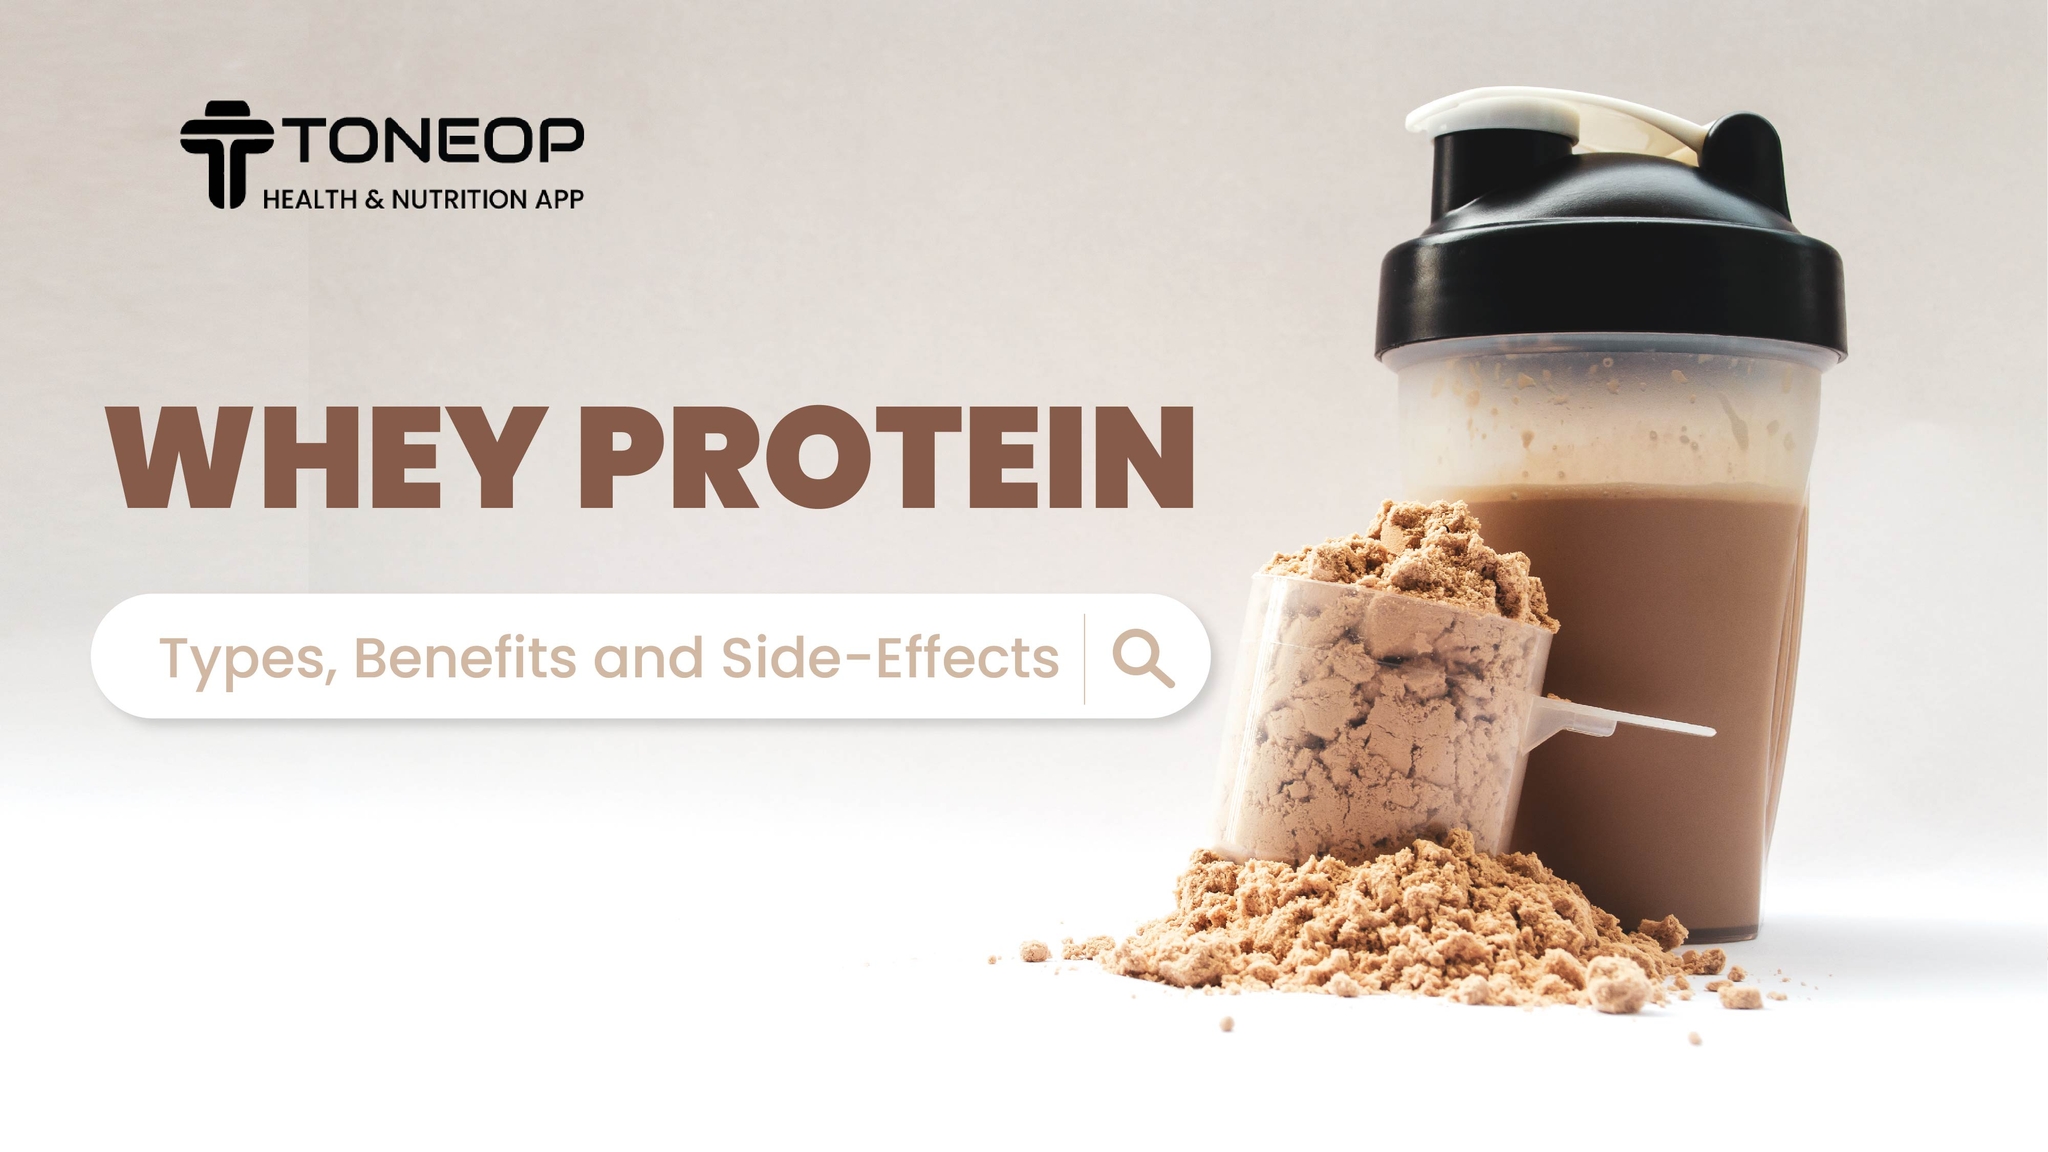 Whey Protein: Types, Benefits and Side-Effects